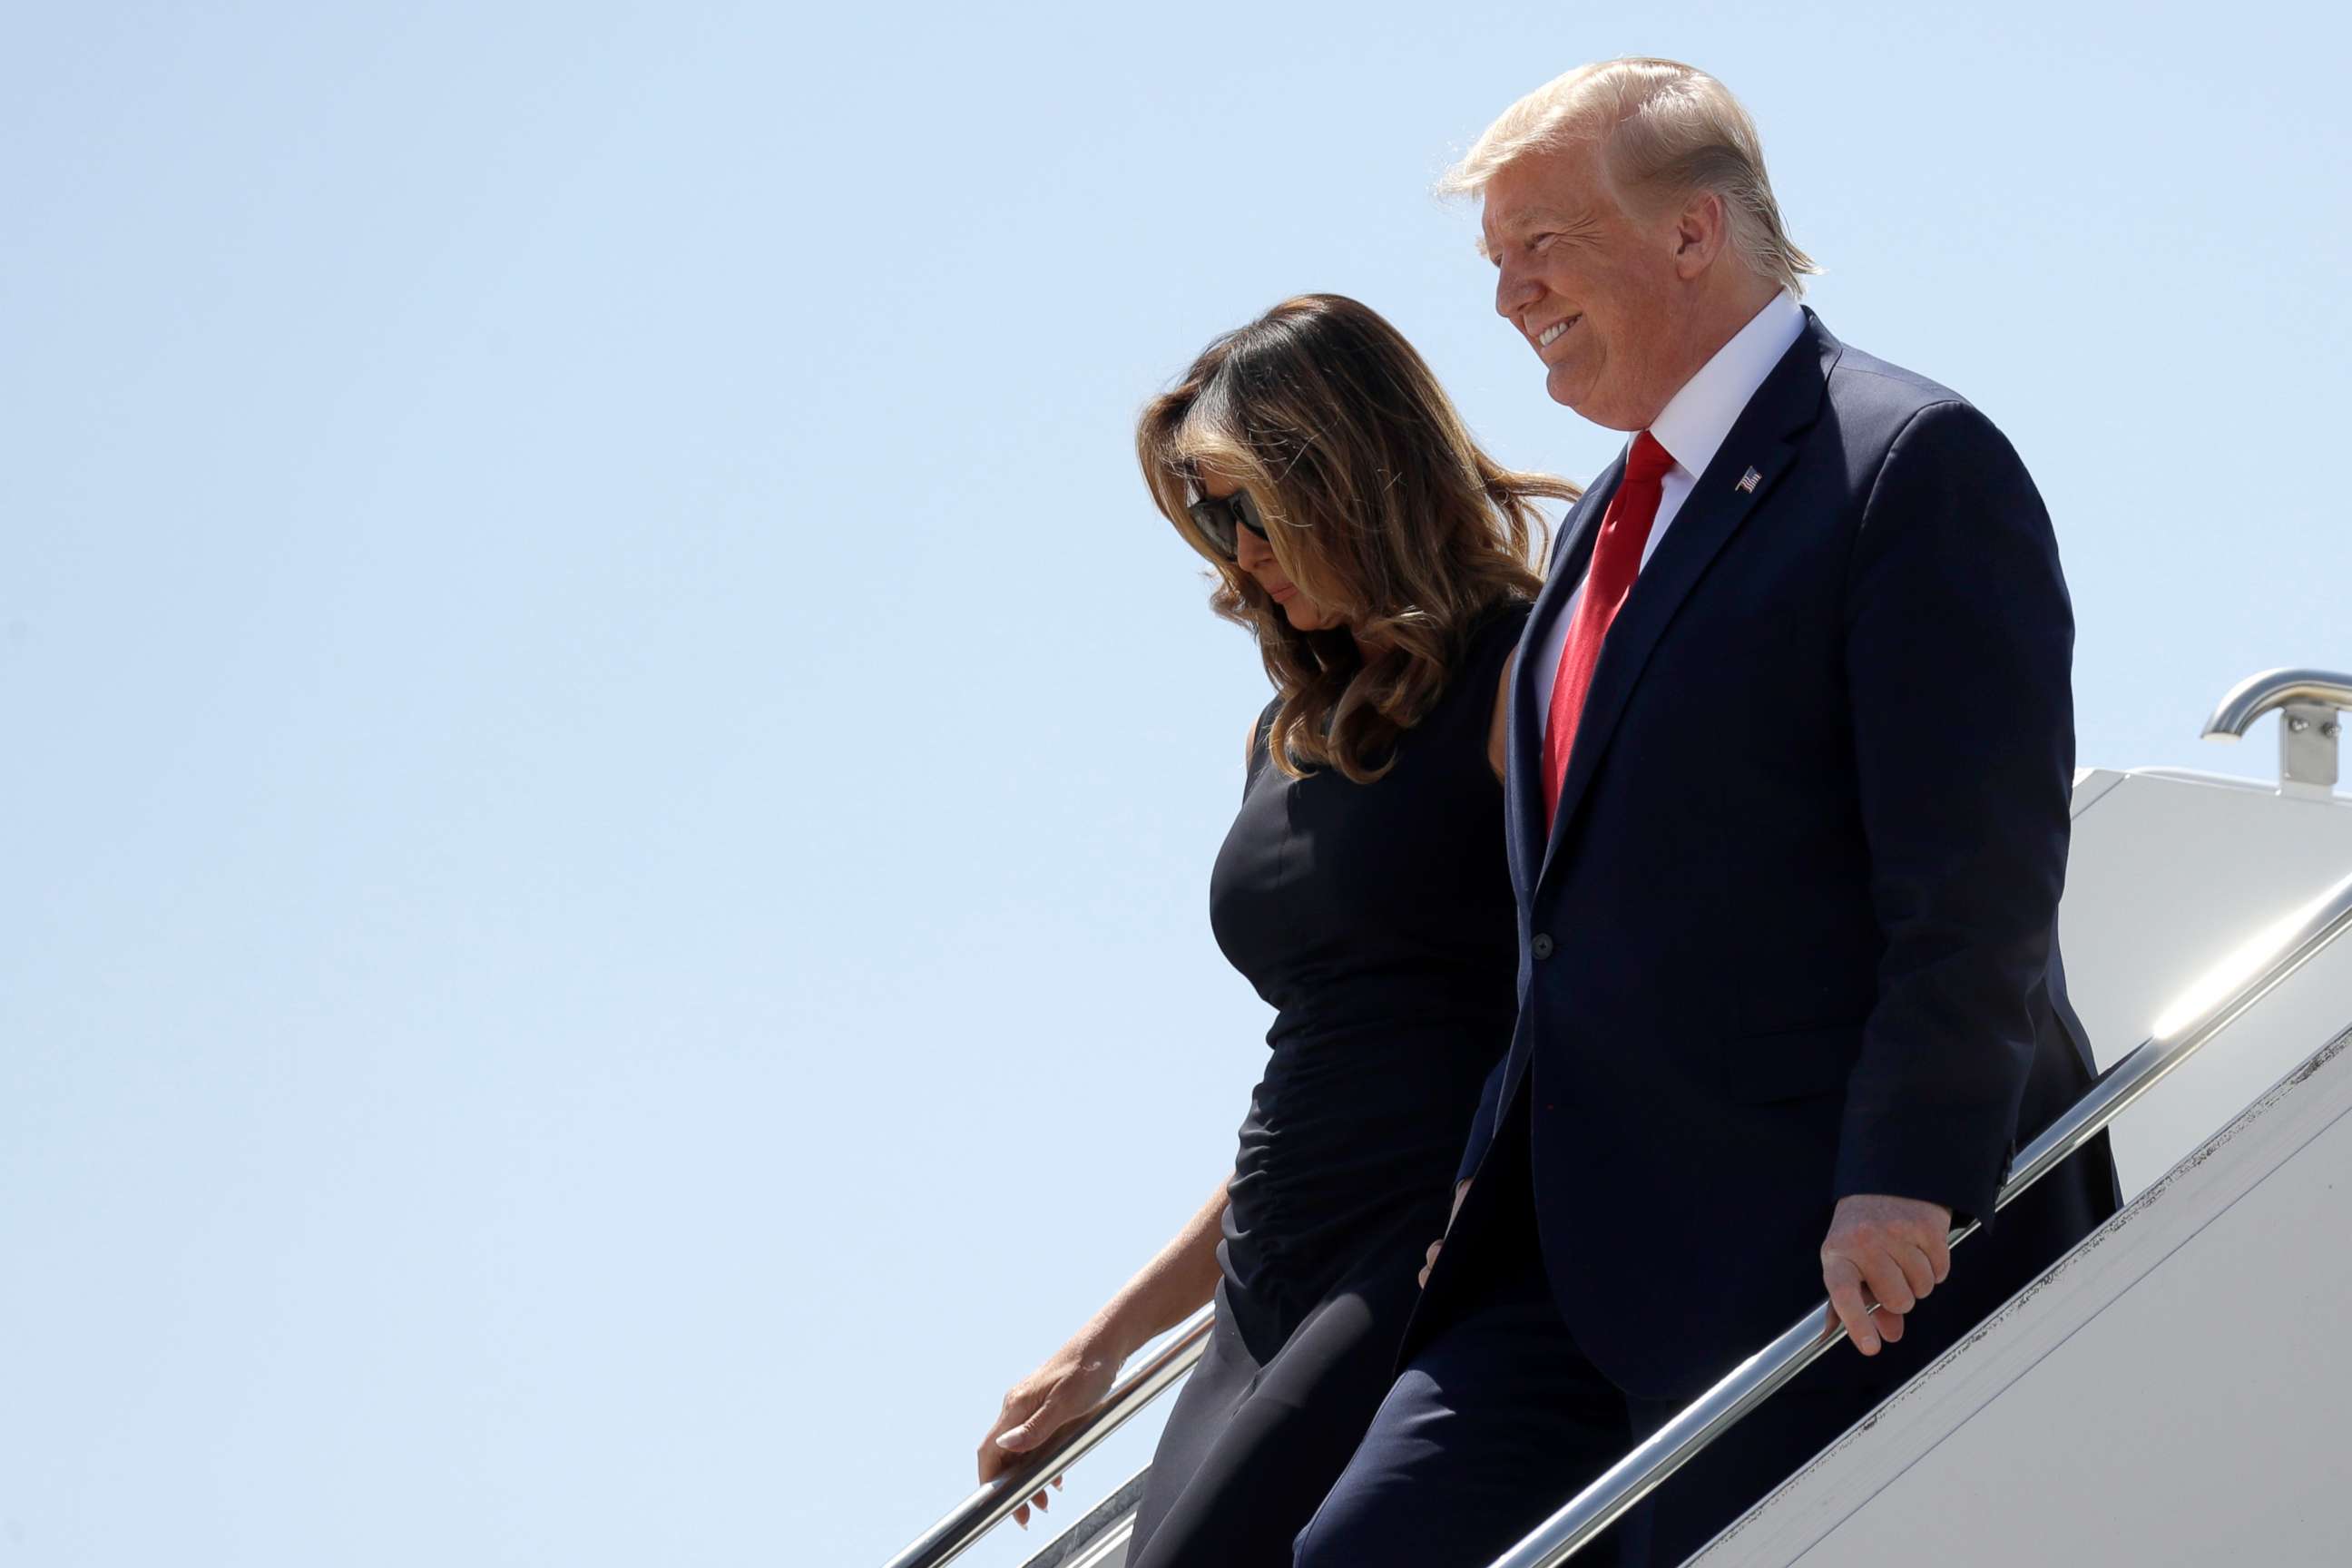 PHOTO: President Donald Trump and first lady Melania Trump arrive at El Paso International Airport to meet with people affected by the El Paso mass shooting, Aug. 7, 2019, in El Paso, Texas.